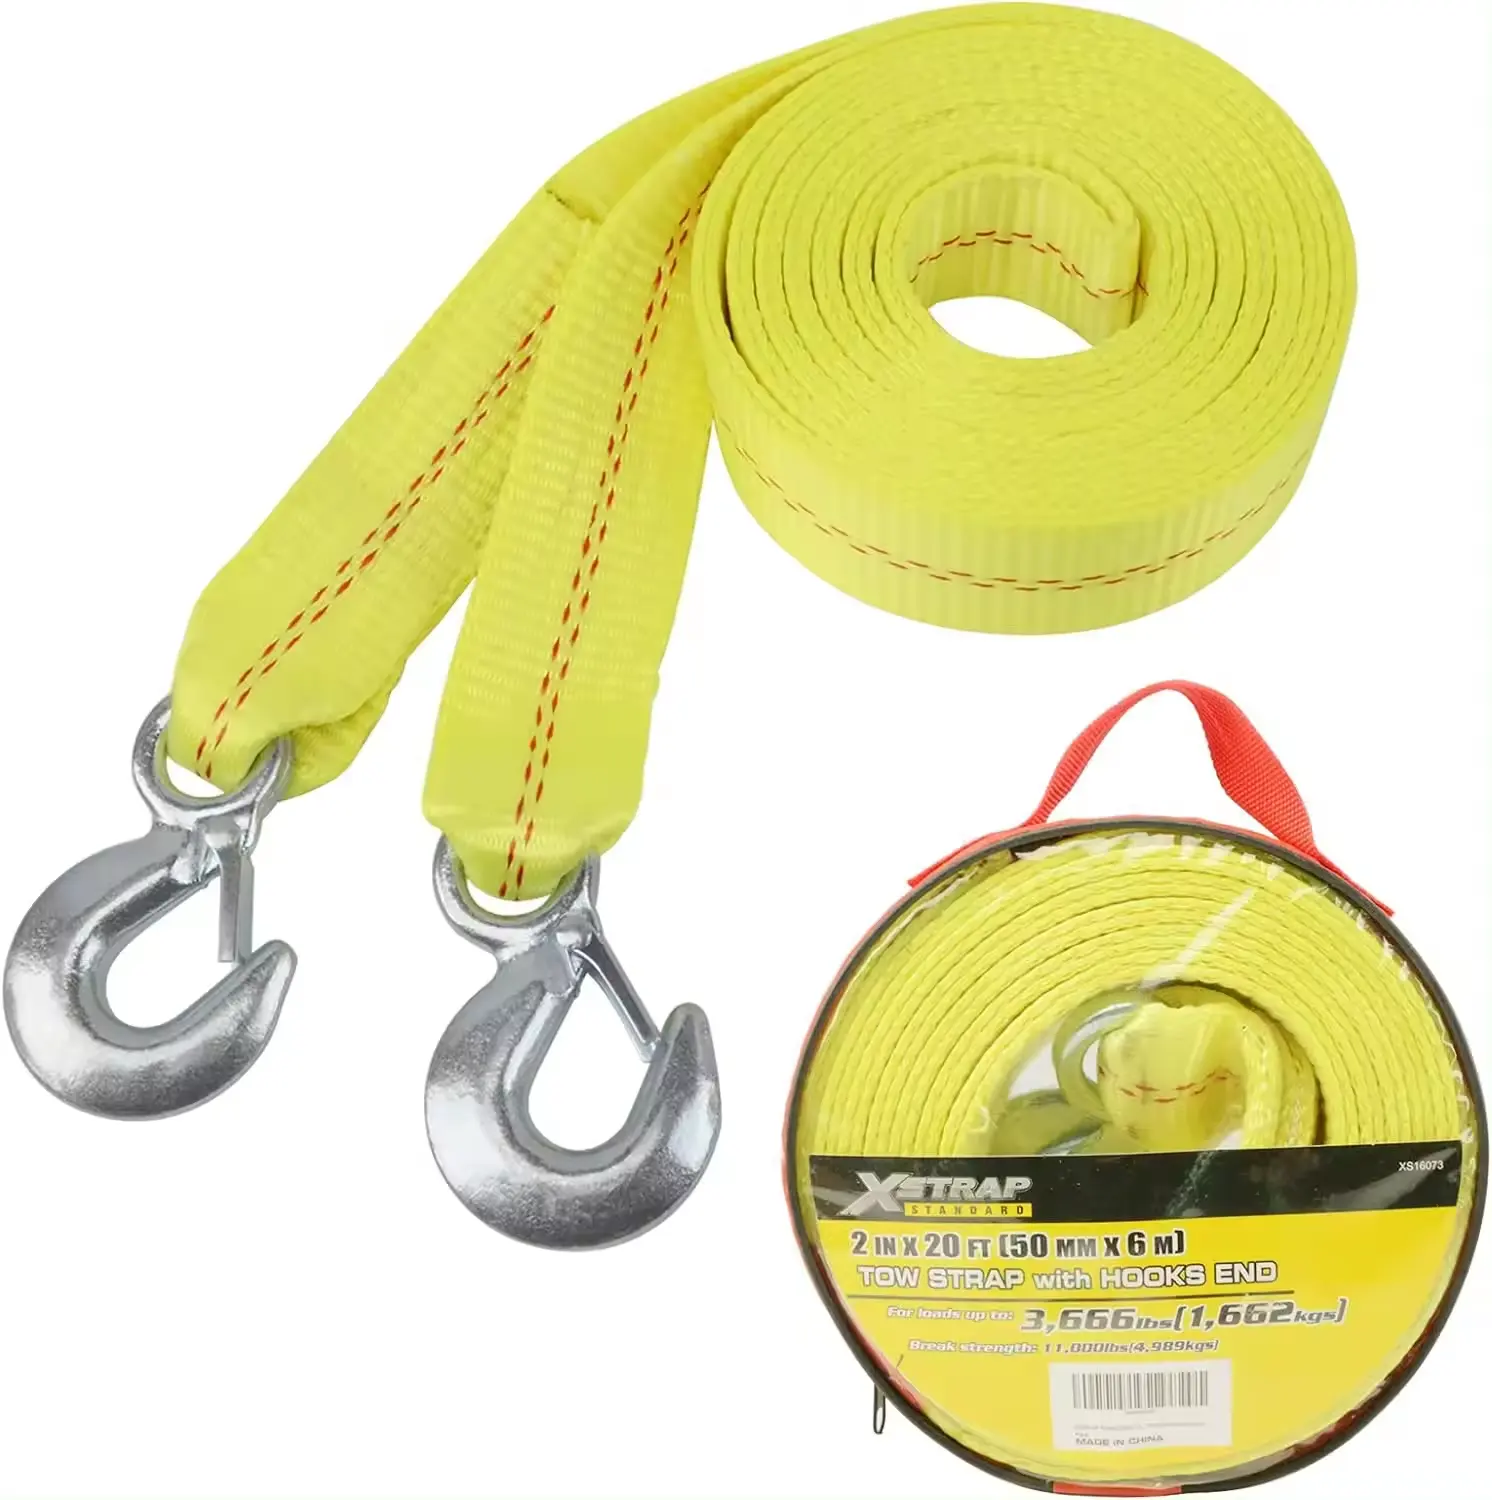 Nylon and Metal Tow Rope for Heavy Equipment Car Tow Strap with Hooks